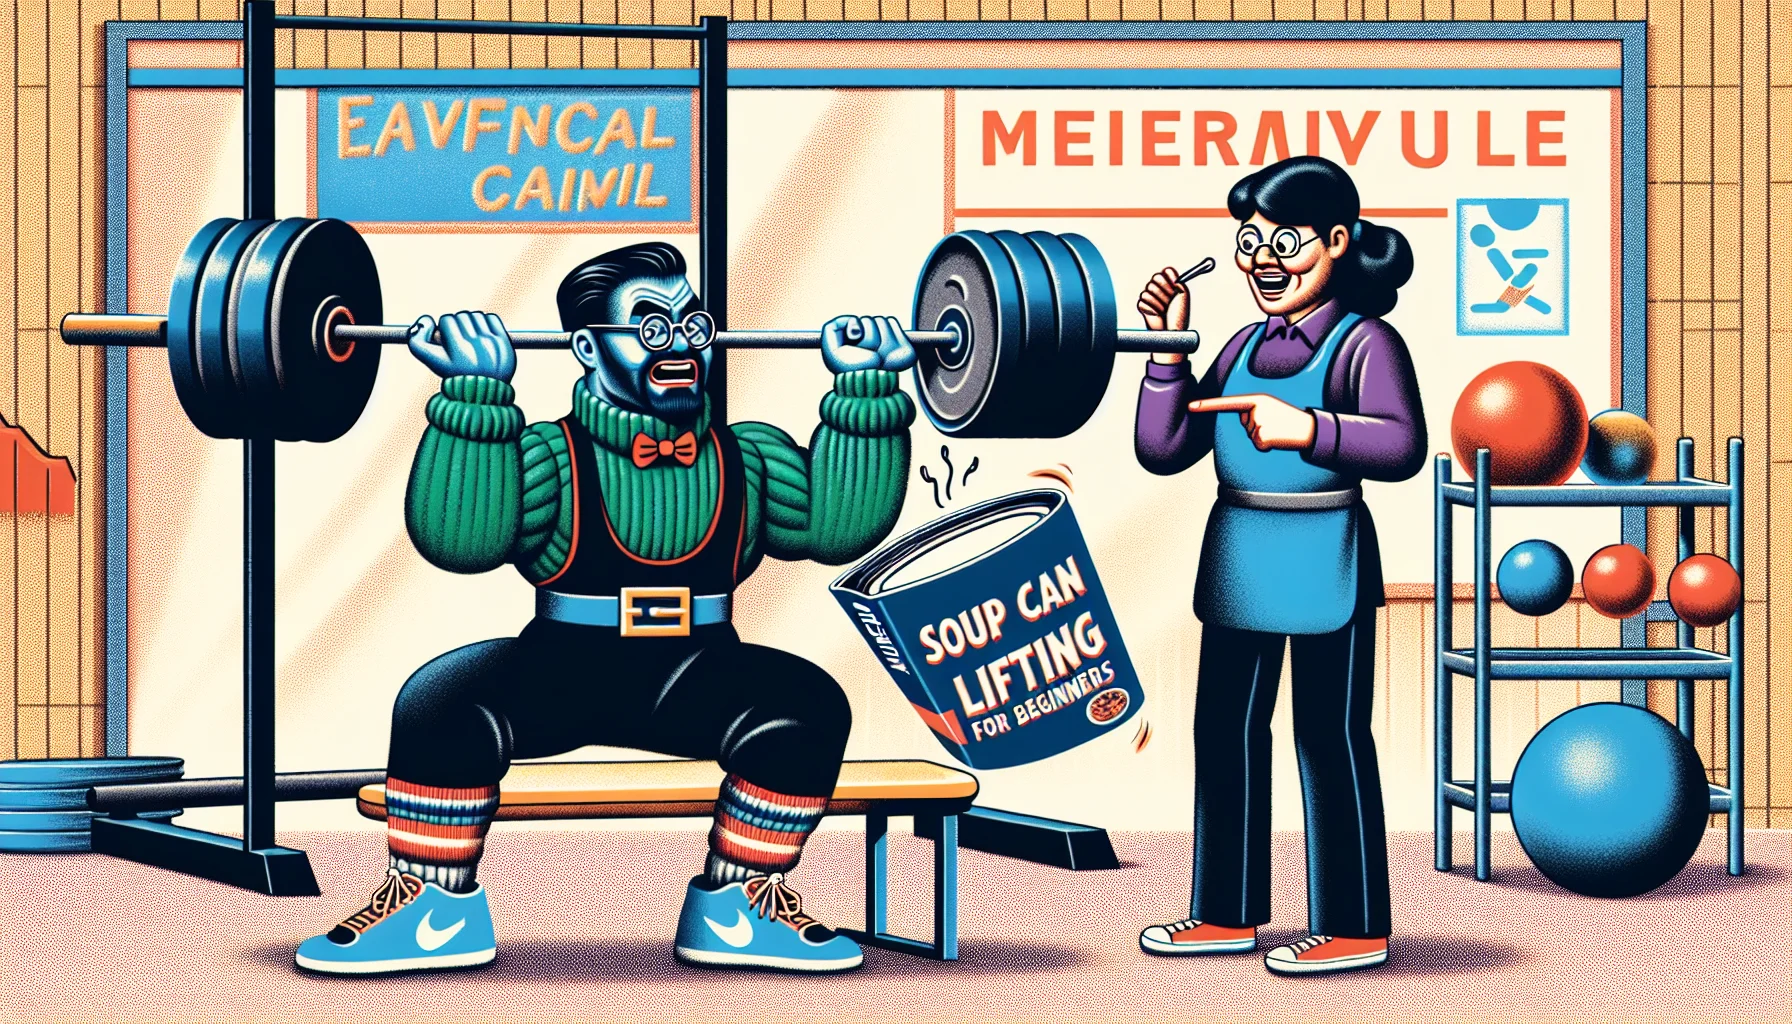 Illustrate a humorous scene that promotes physical fitness. The design should be in the style of realistic clipart featuring powerlifting elements at its heart. Imagine a muscled South Asian male powerlifter, struggling to lift the ever so slightly large soup can, with his eyes bulging and jaw dropped while a Black female personal trainer, standing by his side, is giggling and pointing towards a manual titled 'Soup Can Lifting For Beginners'. The background could include typical gym elements. The goal is to present exercise as fun and engaging activity rather than a daunting task.